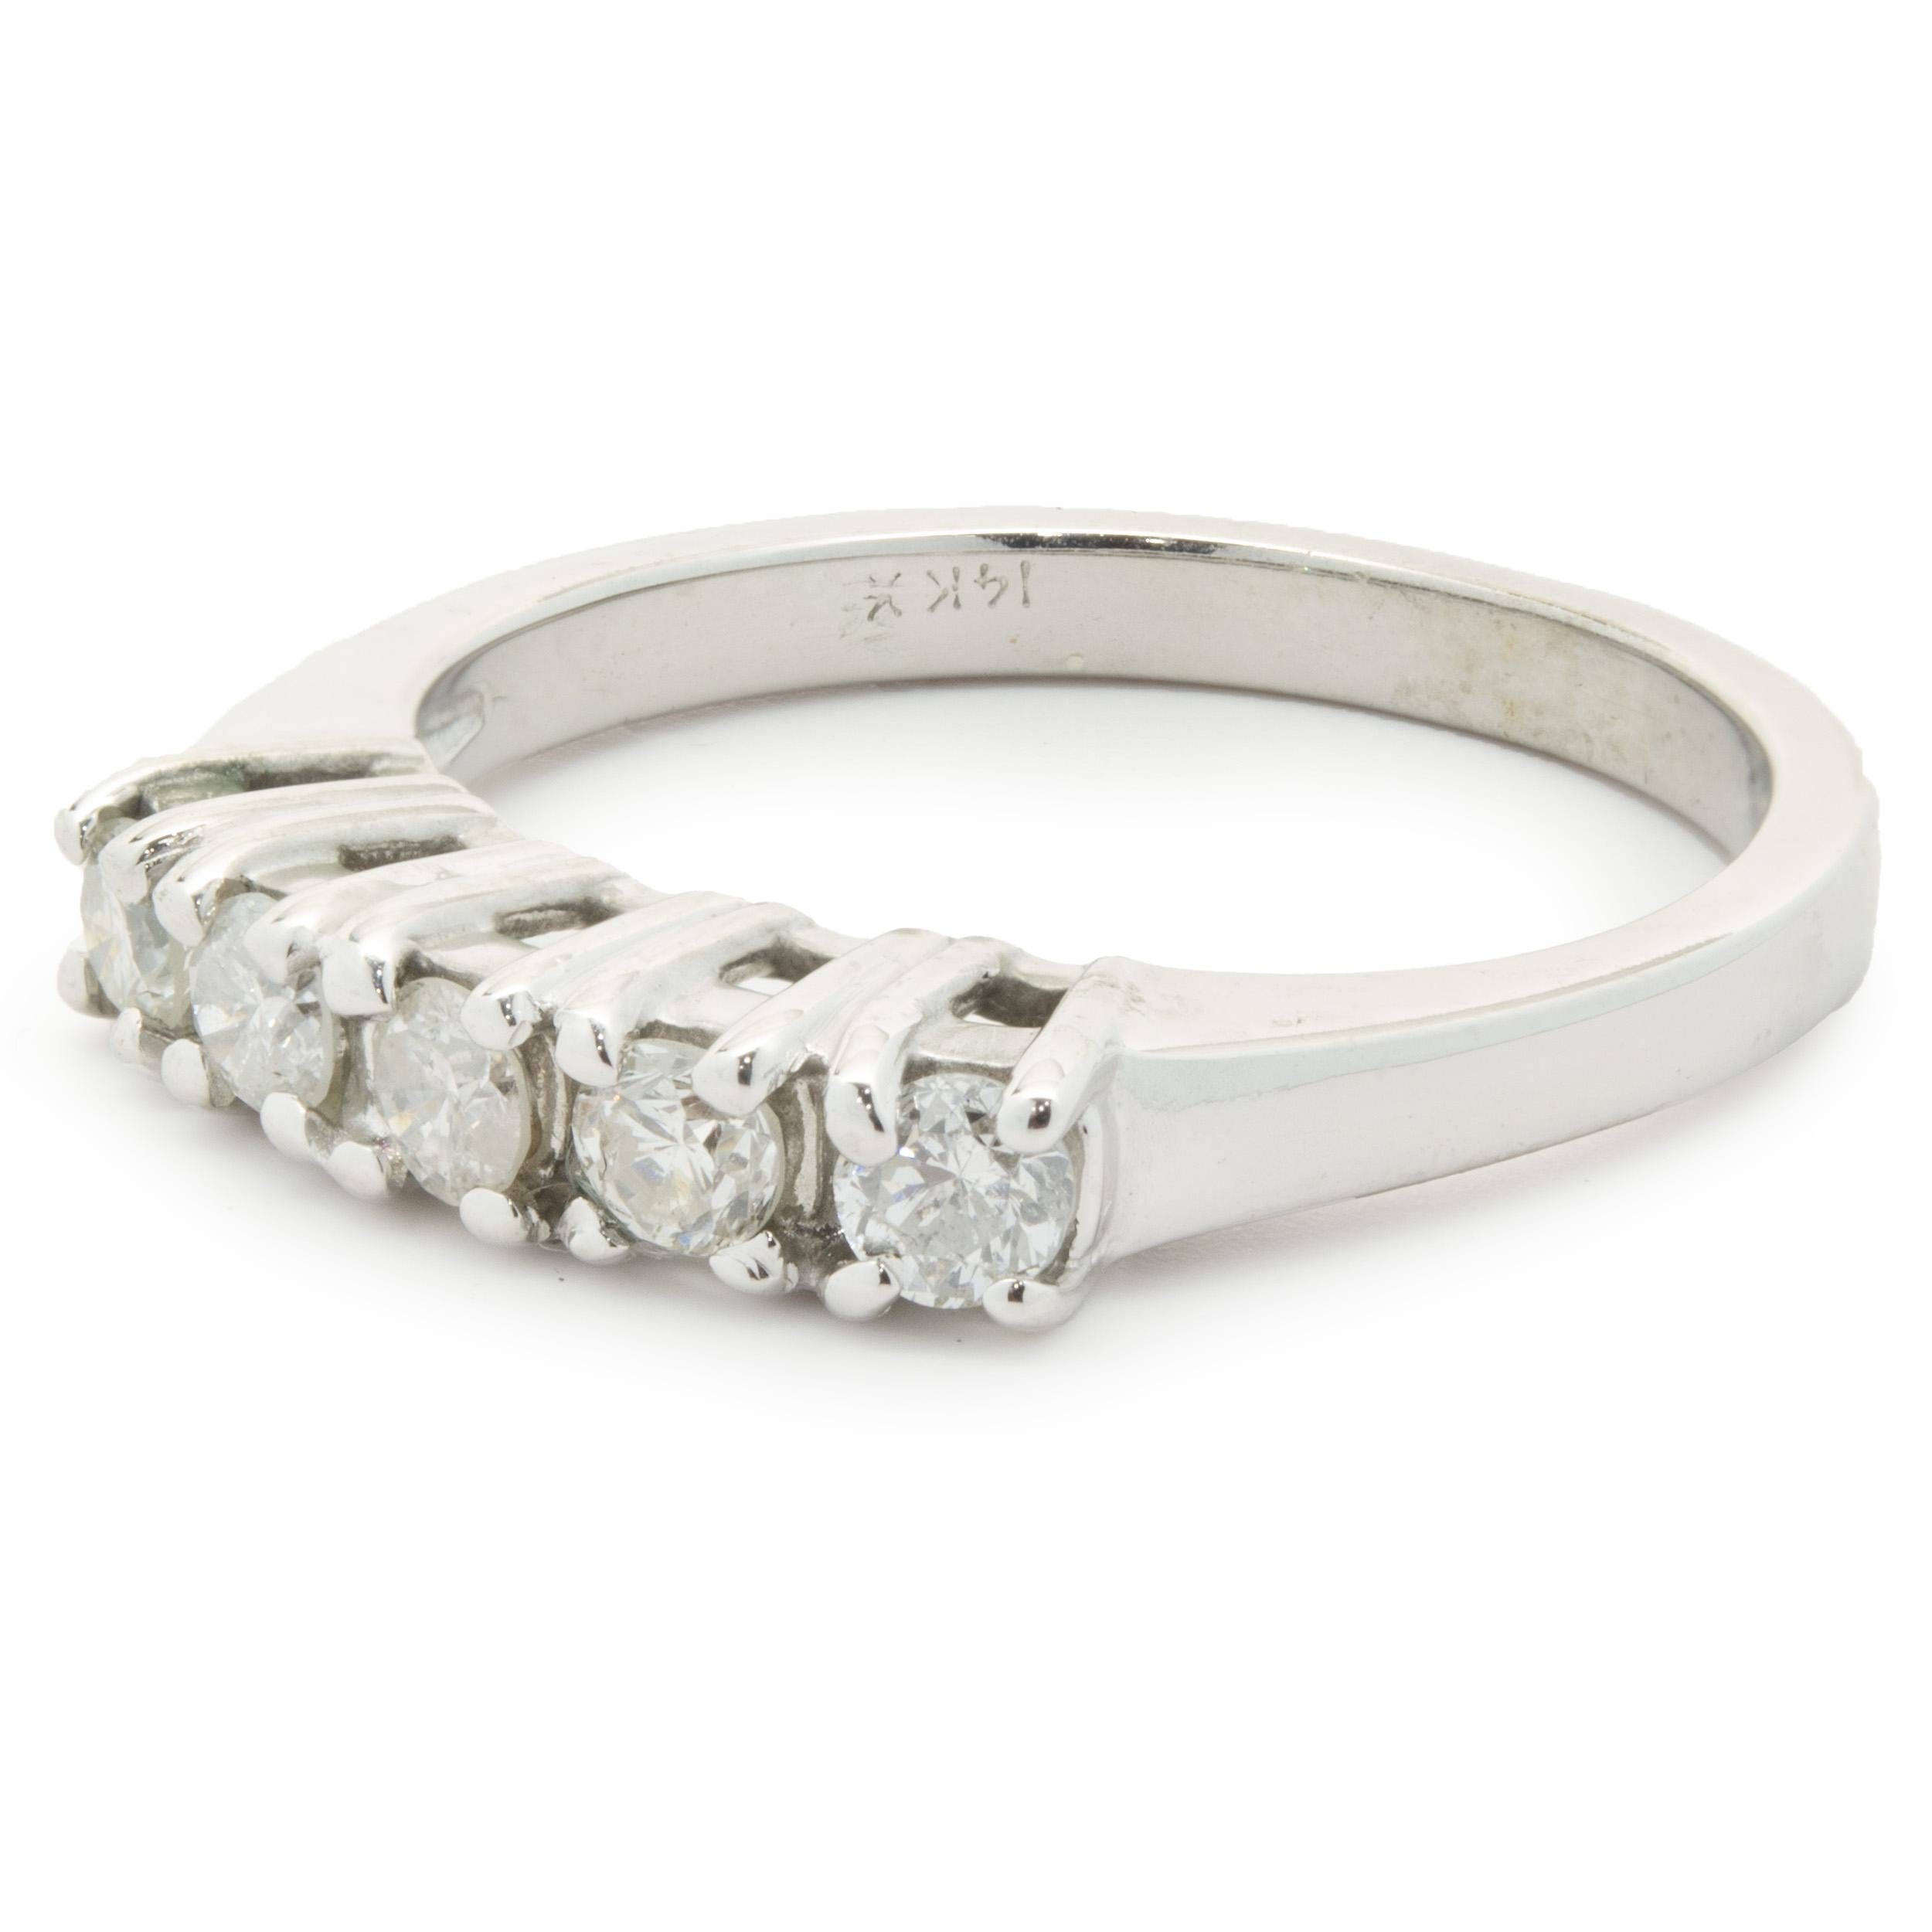 Designer: custom
Material: 14K white gold
Diamond: 5 round brilliant cut = 0.40cttw
Color: H
Clarity: SI2
Size: 5.5 (complimentary sizing available upon request)
Weight: 2.94 grams
